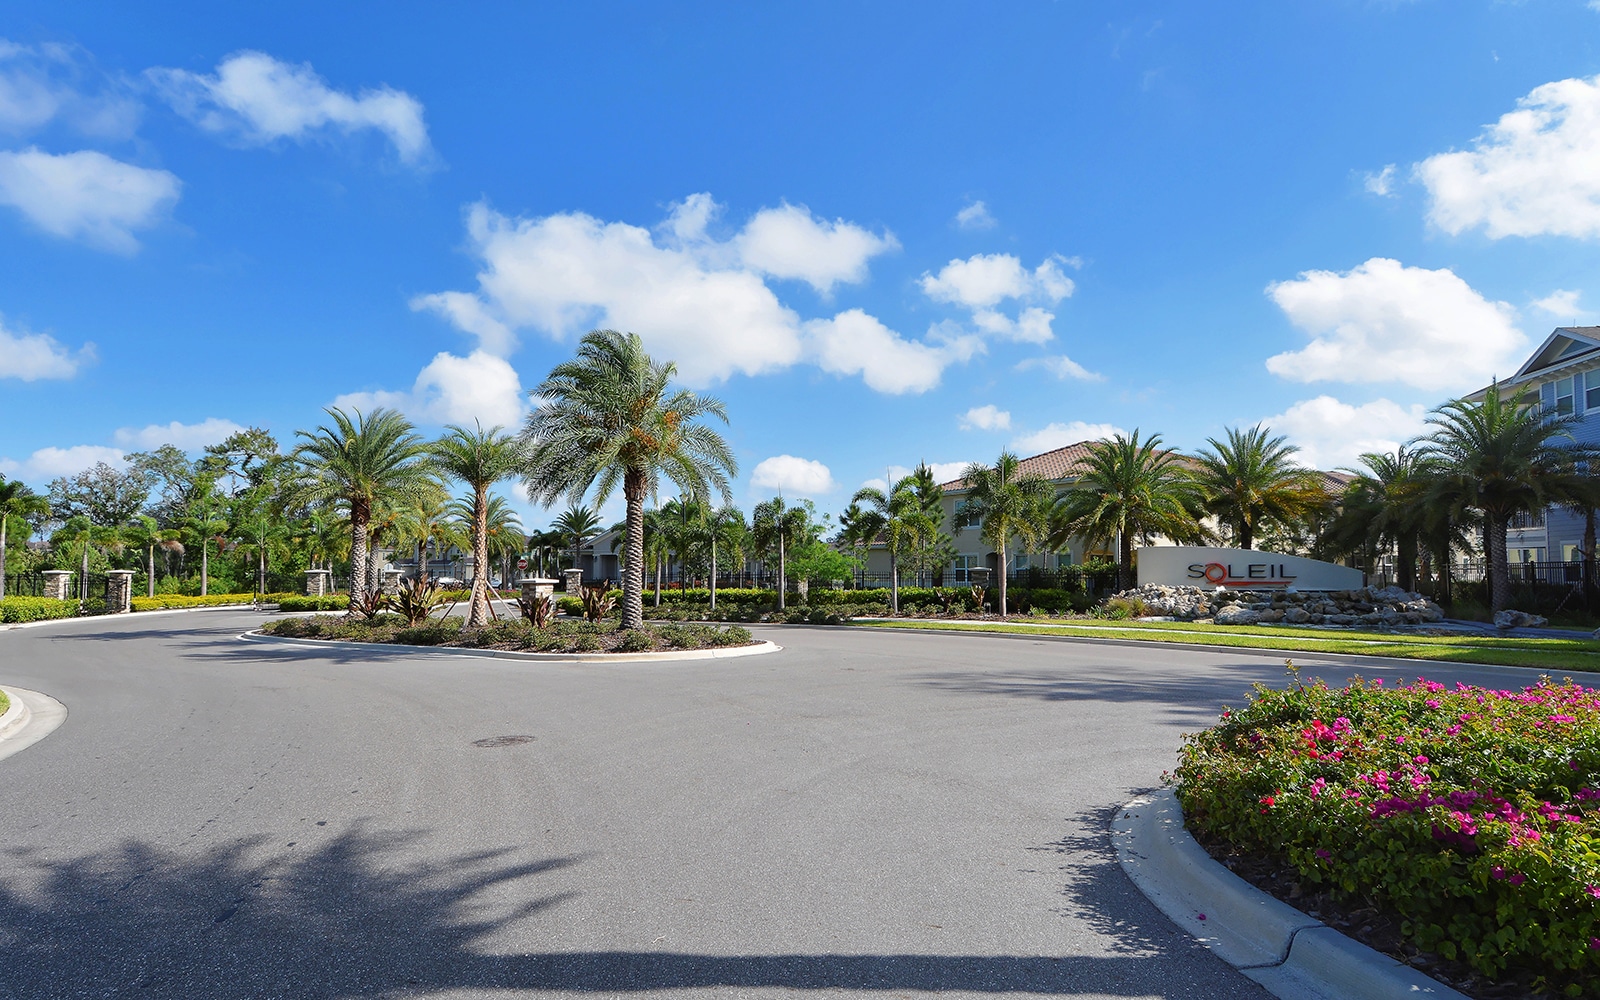 Soleil in Sarasota : Condos & Homes for Sale with Amenities